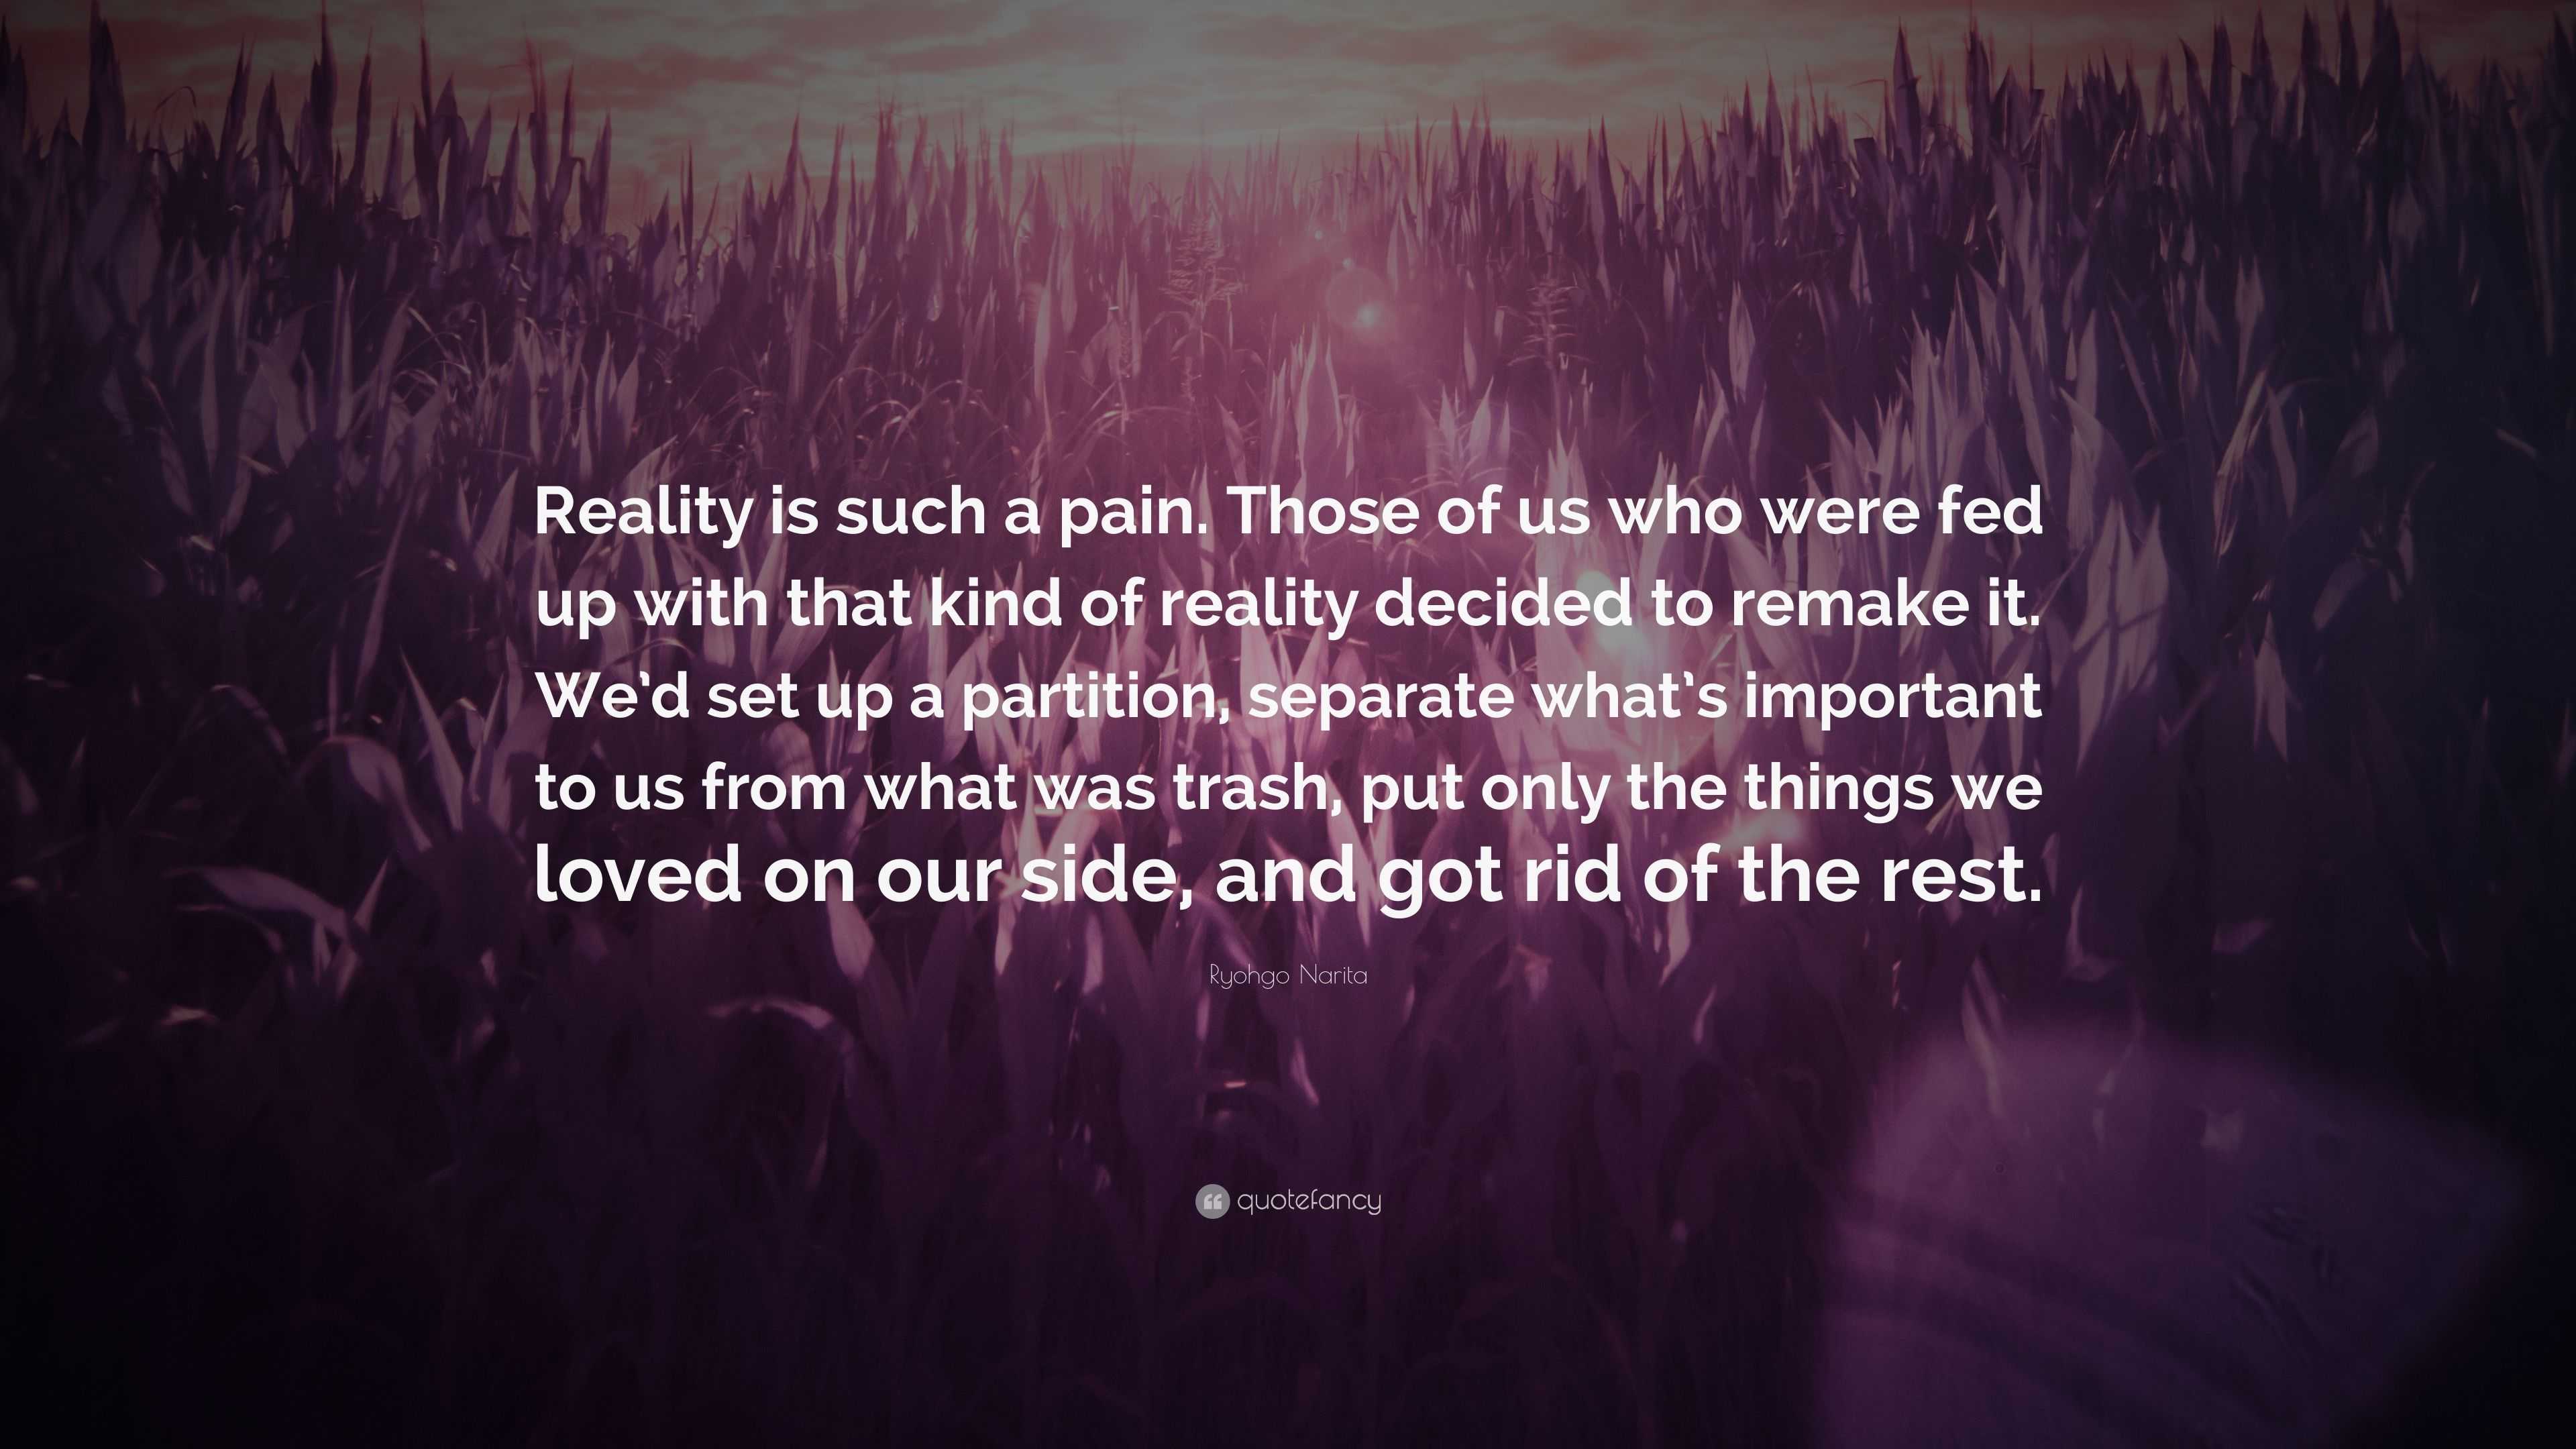 Ryohgo Narita Quote: “Reality is such a pain. Those of us who were fed ...